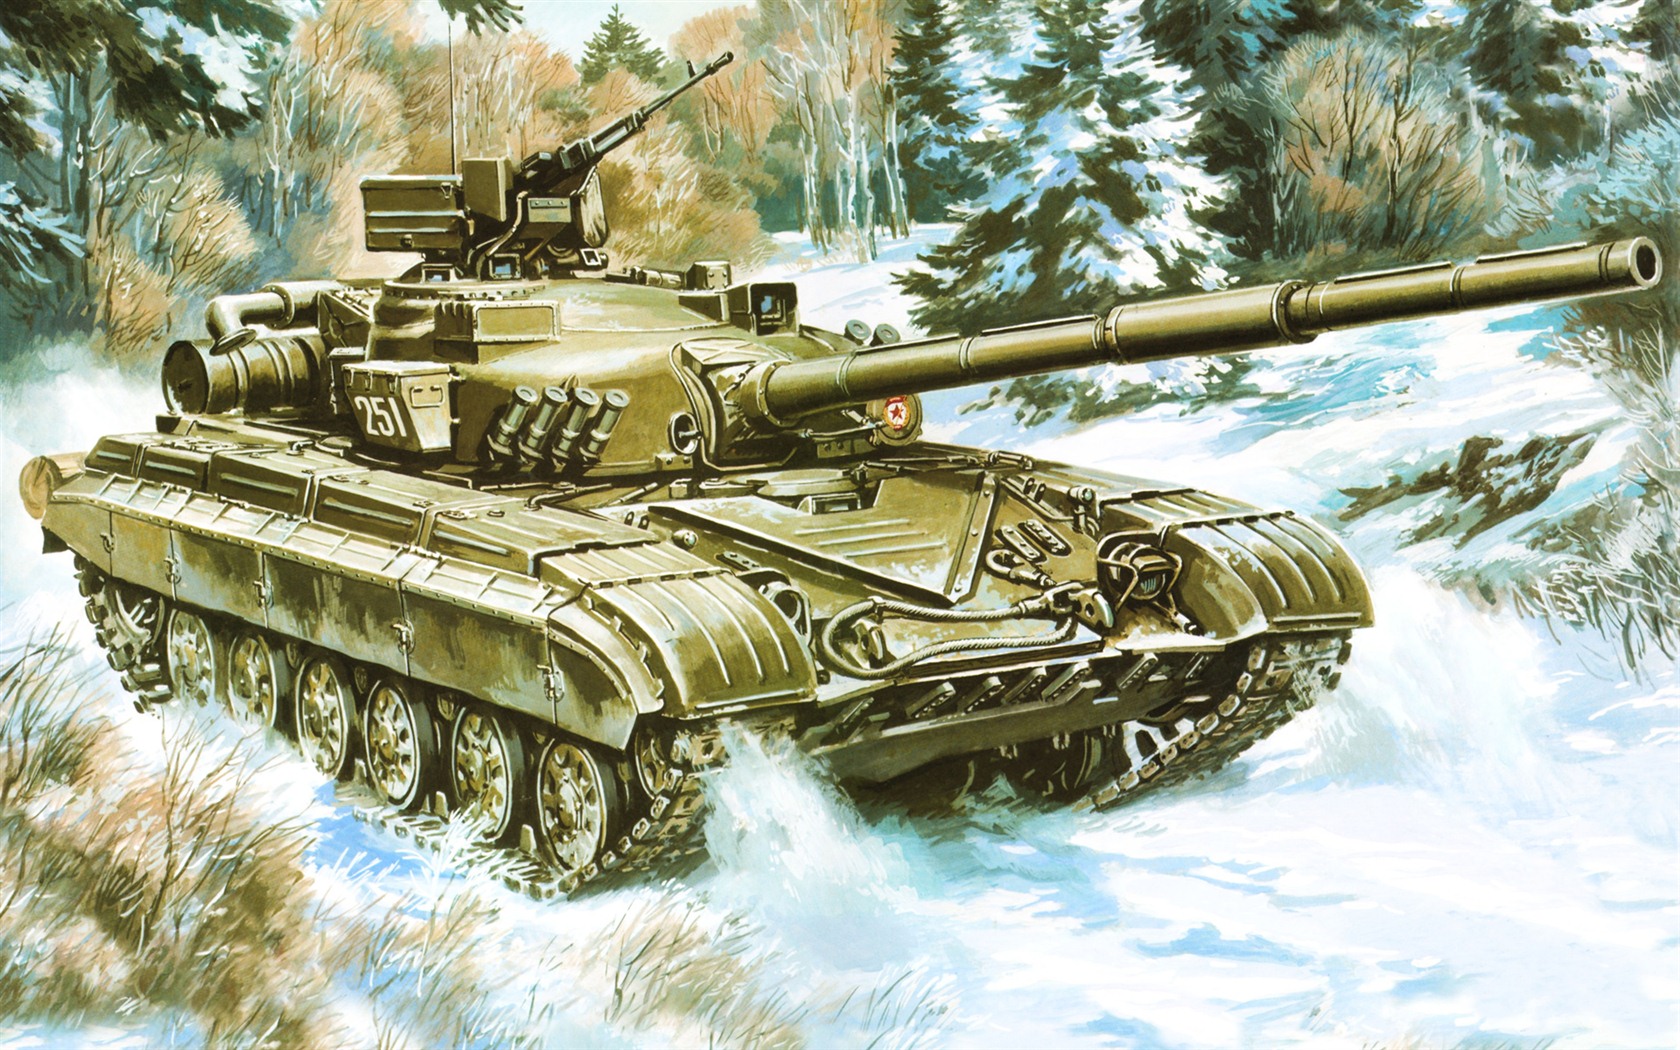 Military tanks, armored HD painting wallpapers #1 - 1680x1050